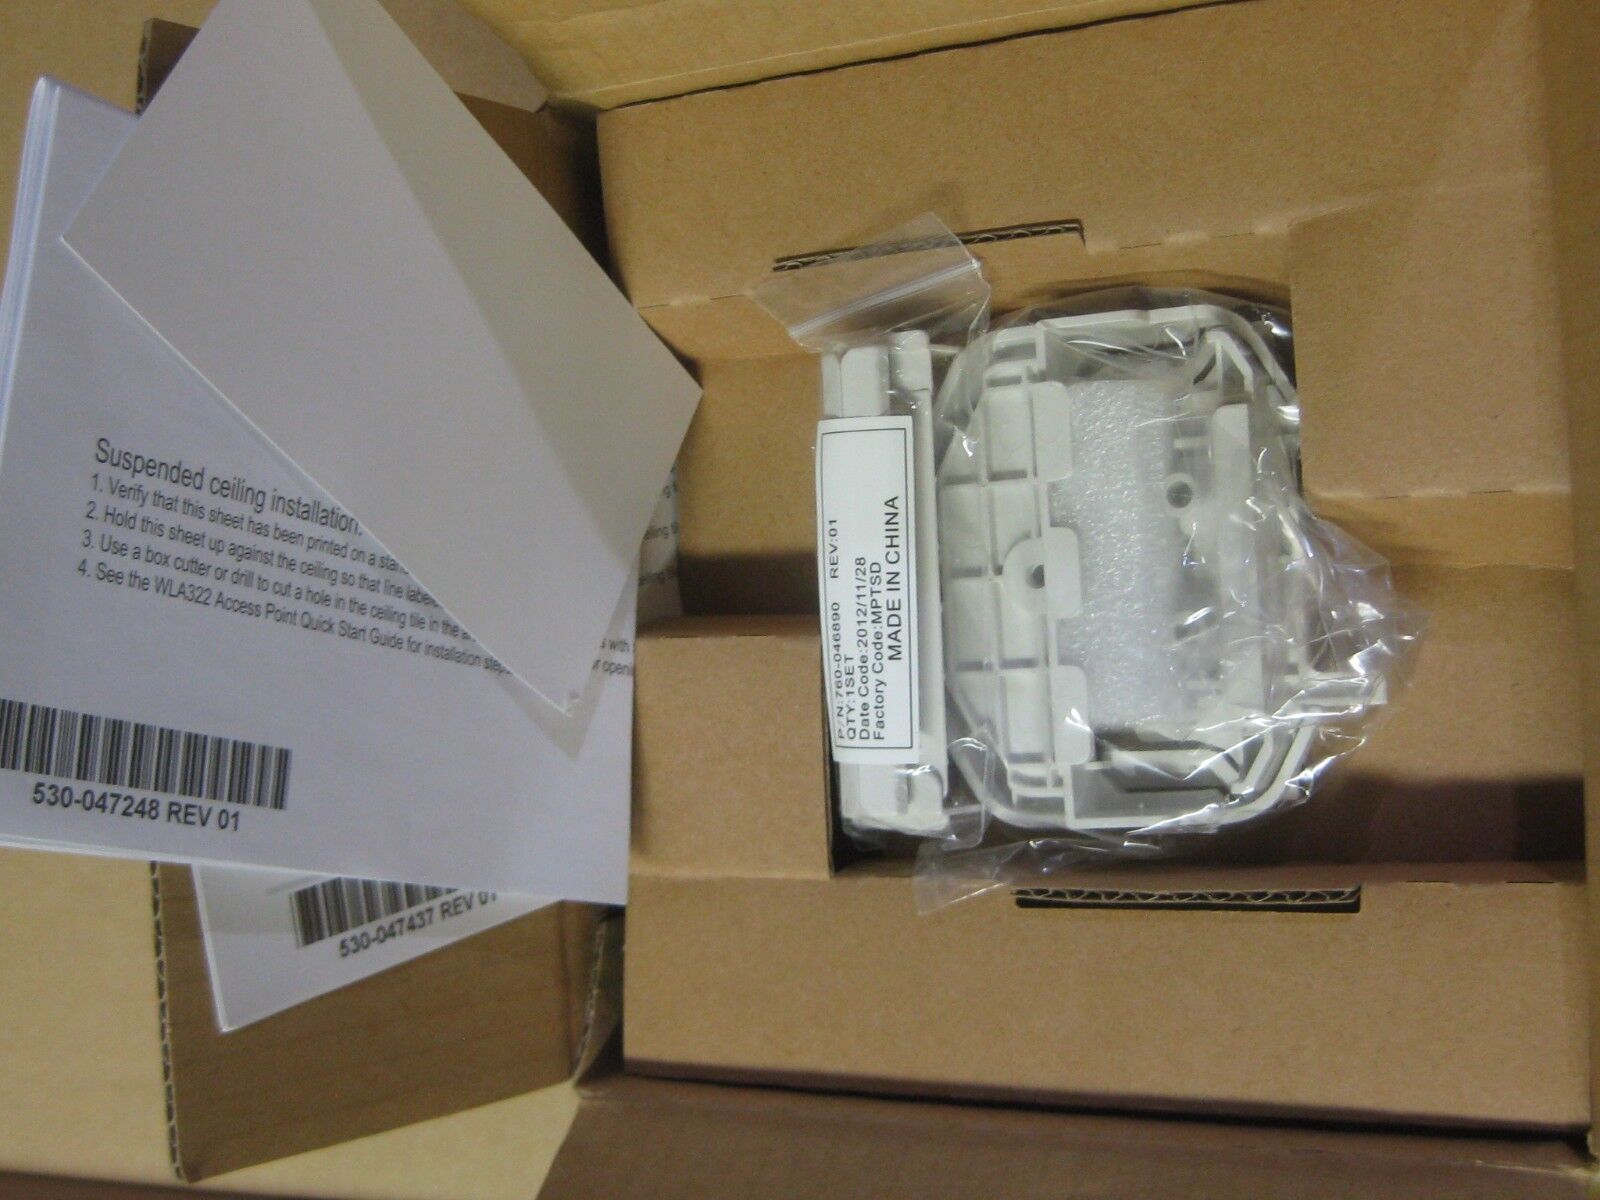 Juniper Networks WLA322 IEEE 802.11n 300 Mbit/s Wireless Access Point - ISM Band